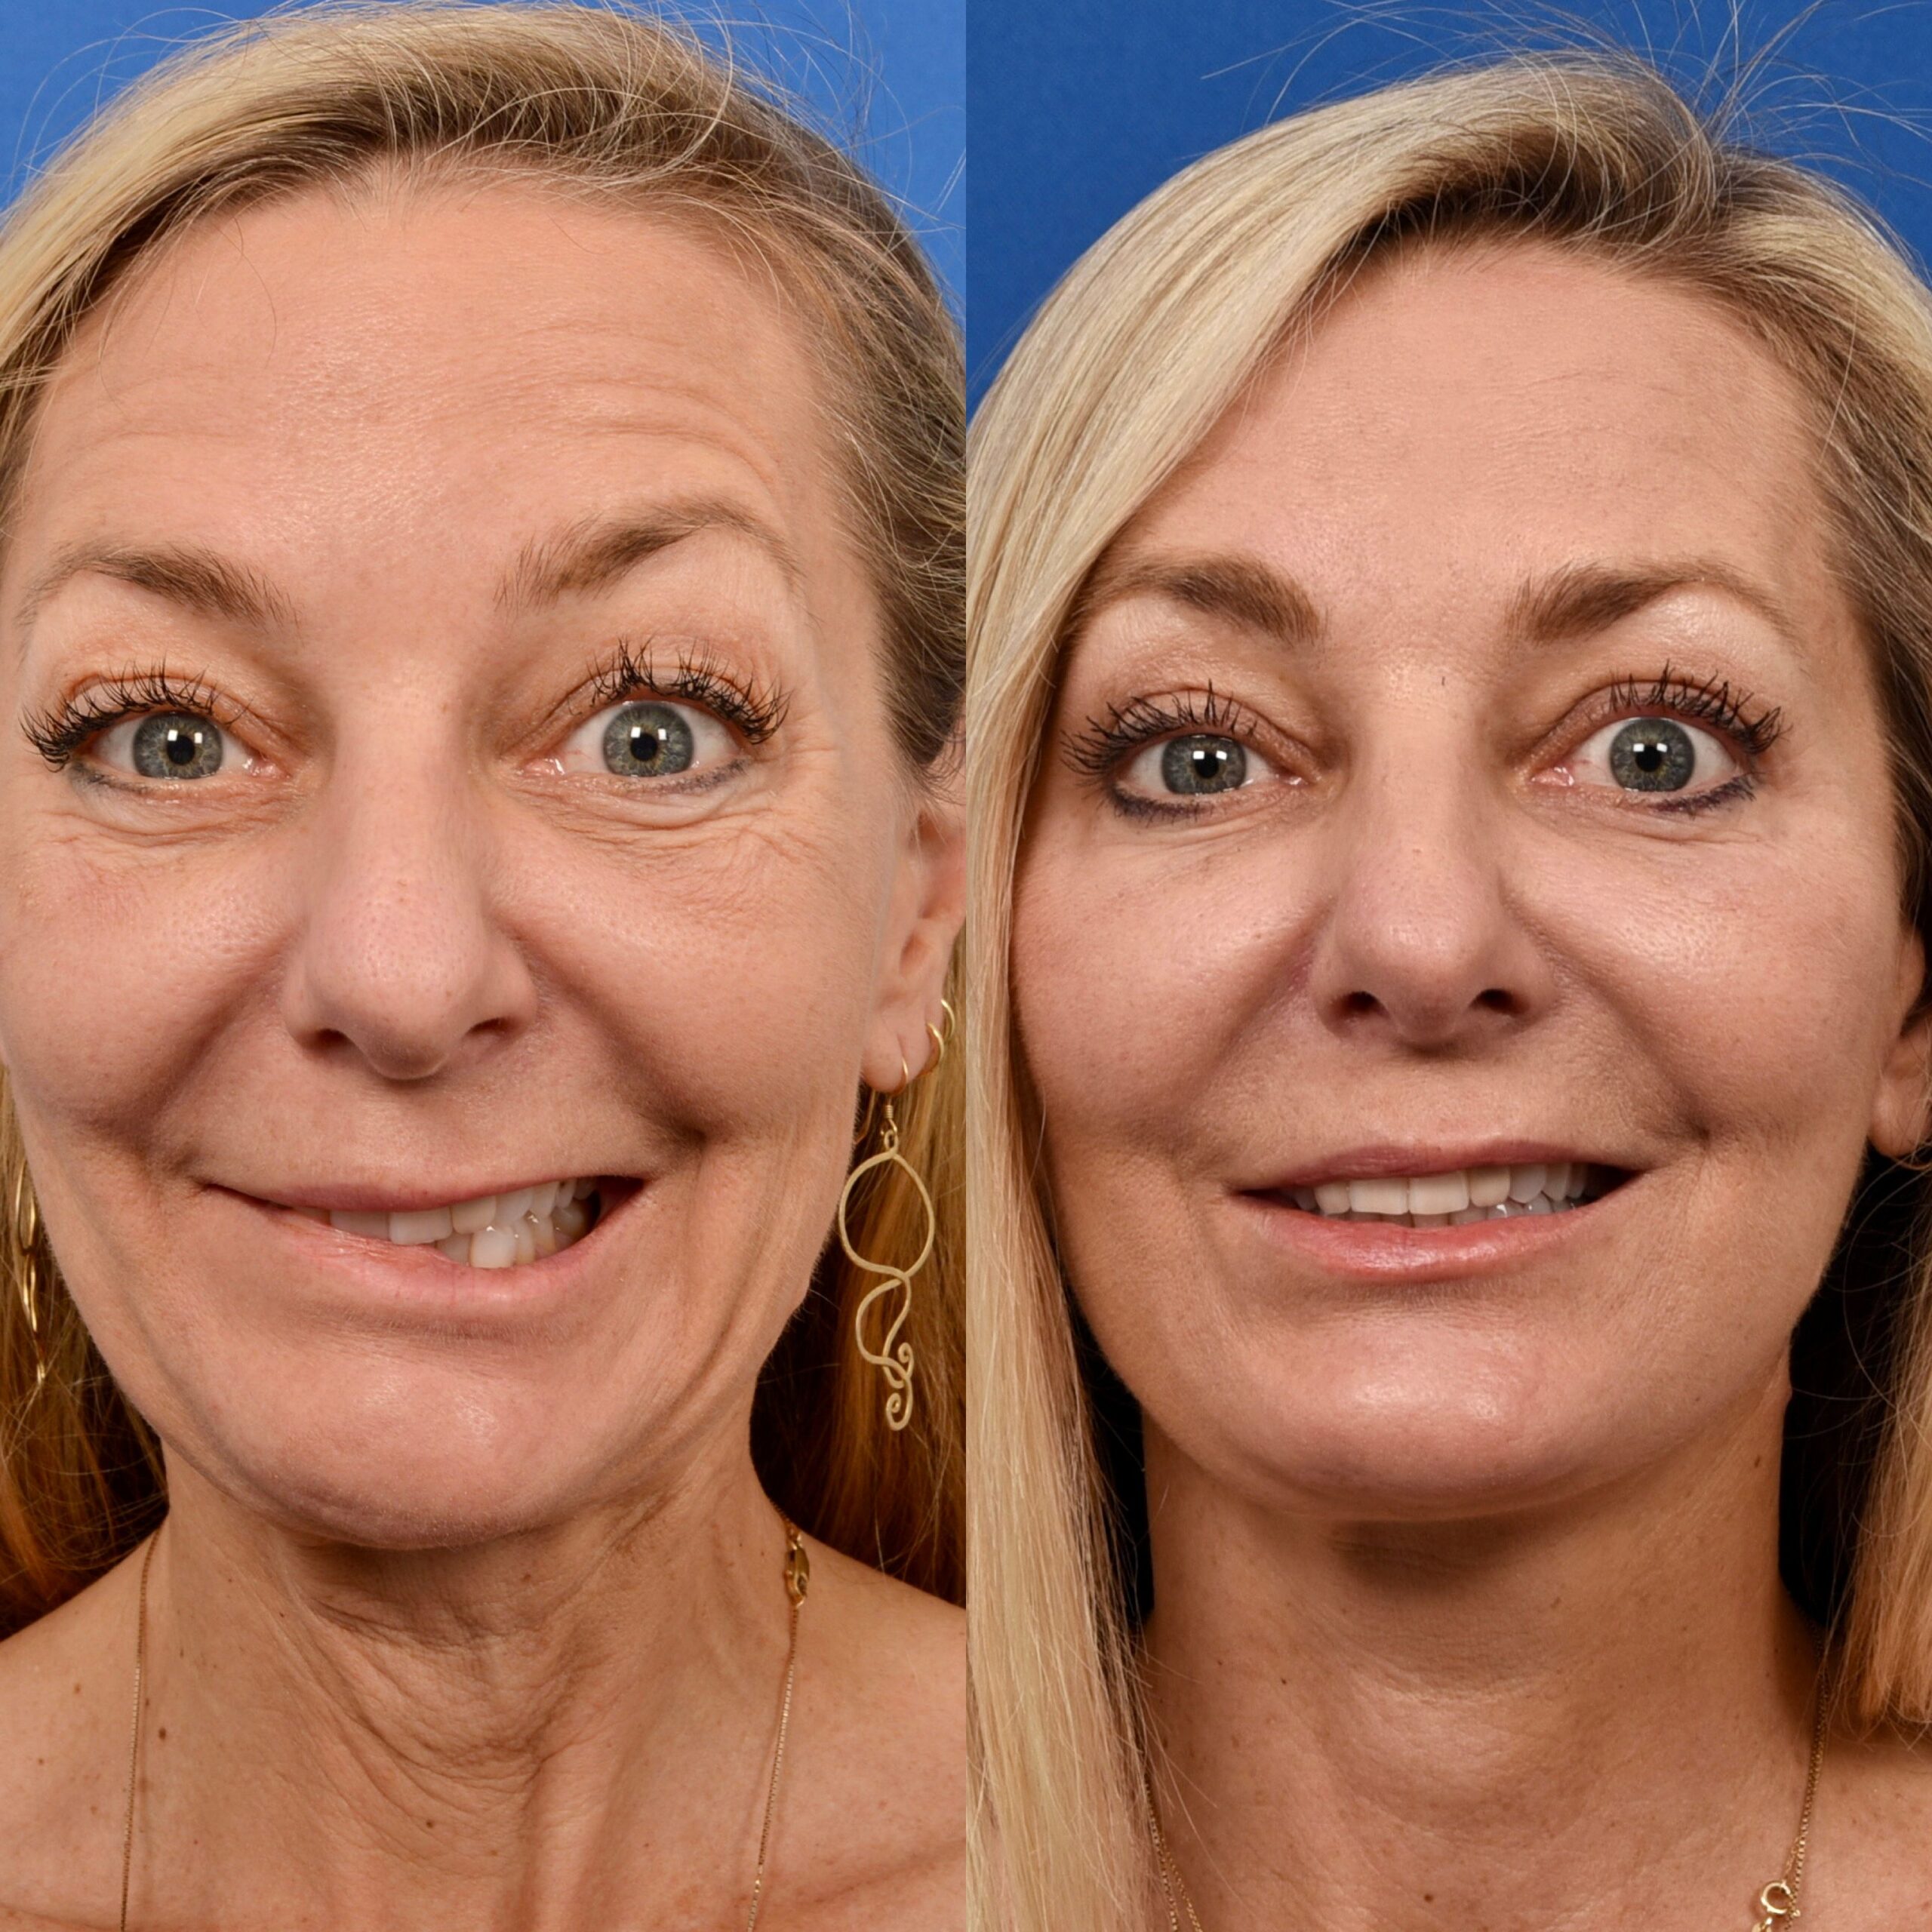 A woman with facial paralysis surgery before and after. Smile reanimation transformation pictures.